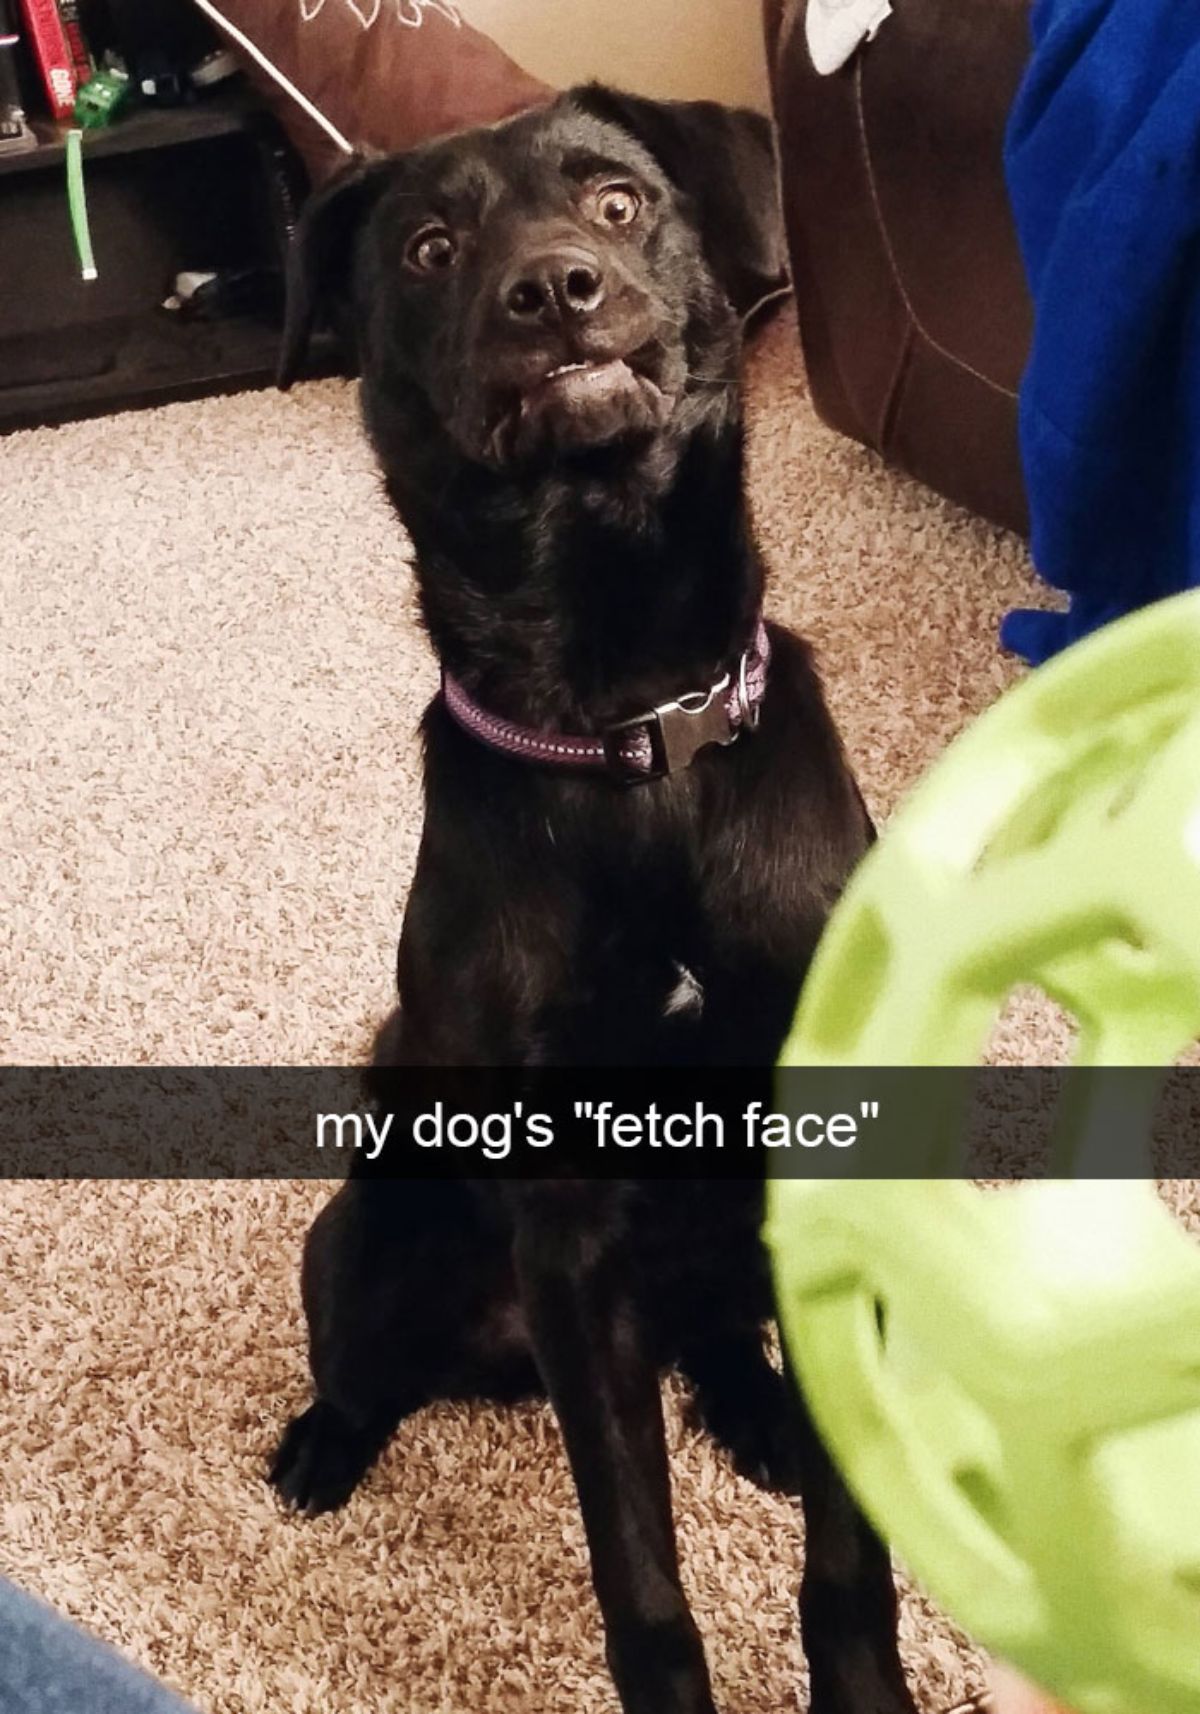 black dog sitting on the floor in front of a green ball looking surprised with a caption saying my dog's "fetch face"